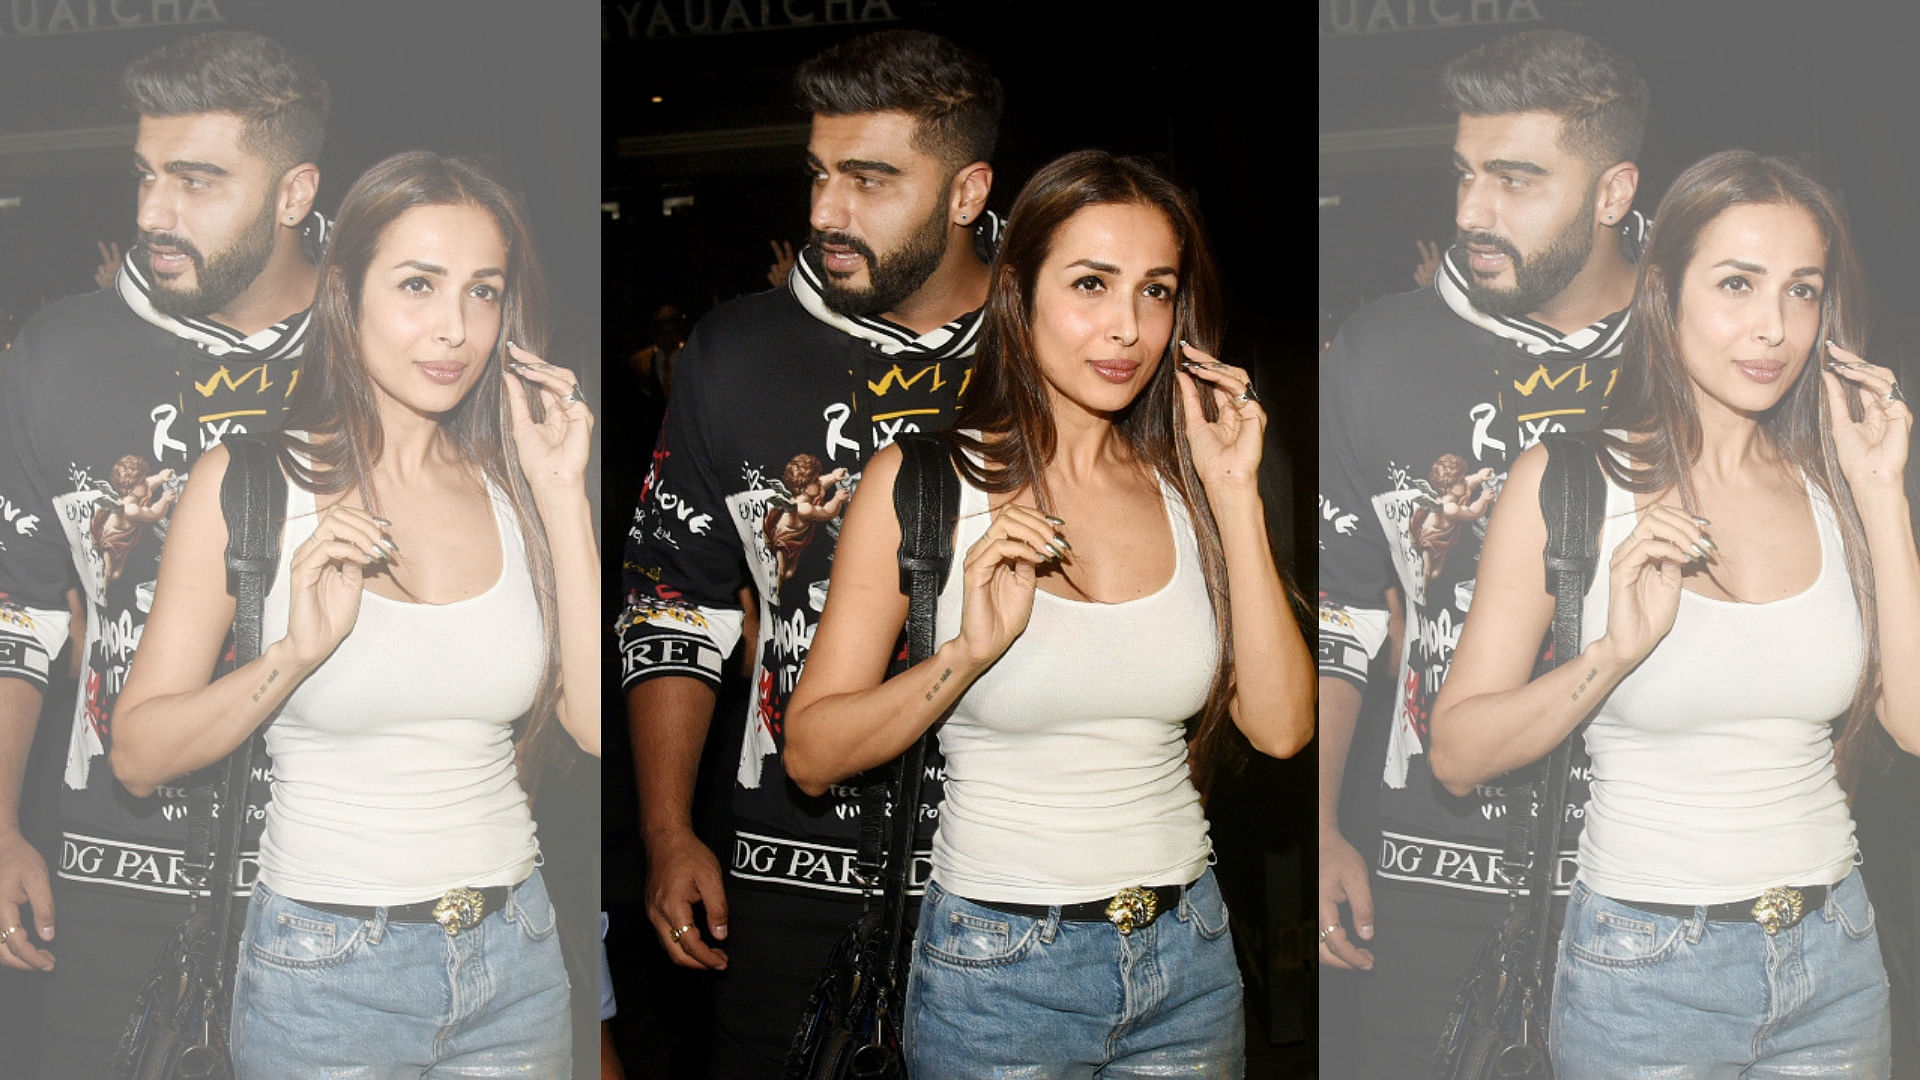 Social media has been abuzz about Arjun’s rumoured relationship with actor Malaika Arora.